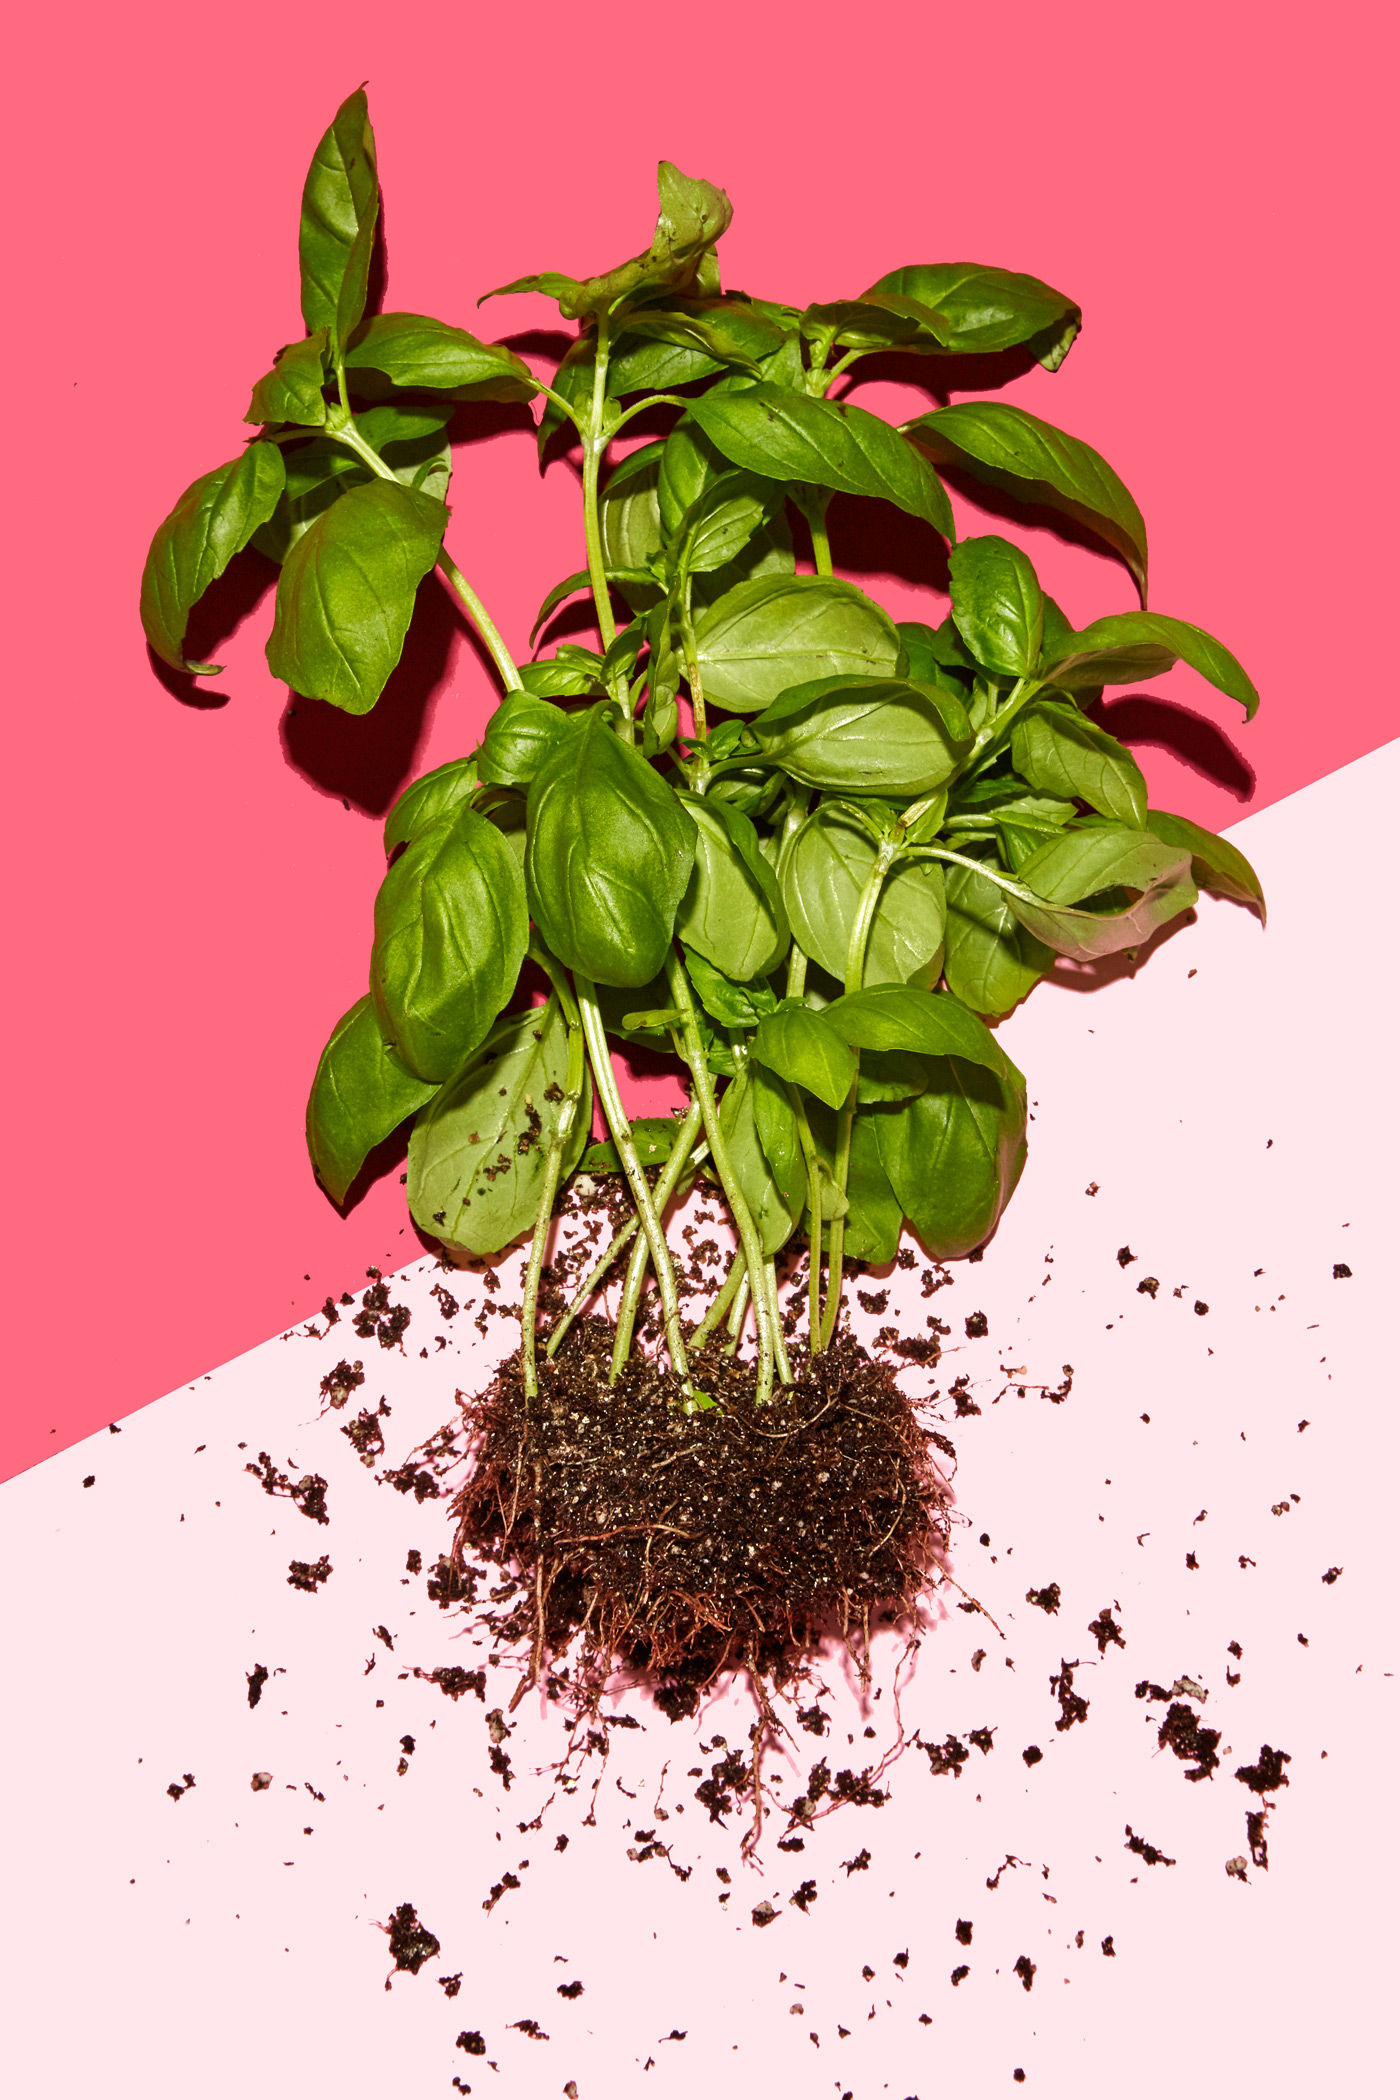 healthiest foods, health food, diet, nutrition, time.com stock, basil, herb